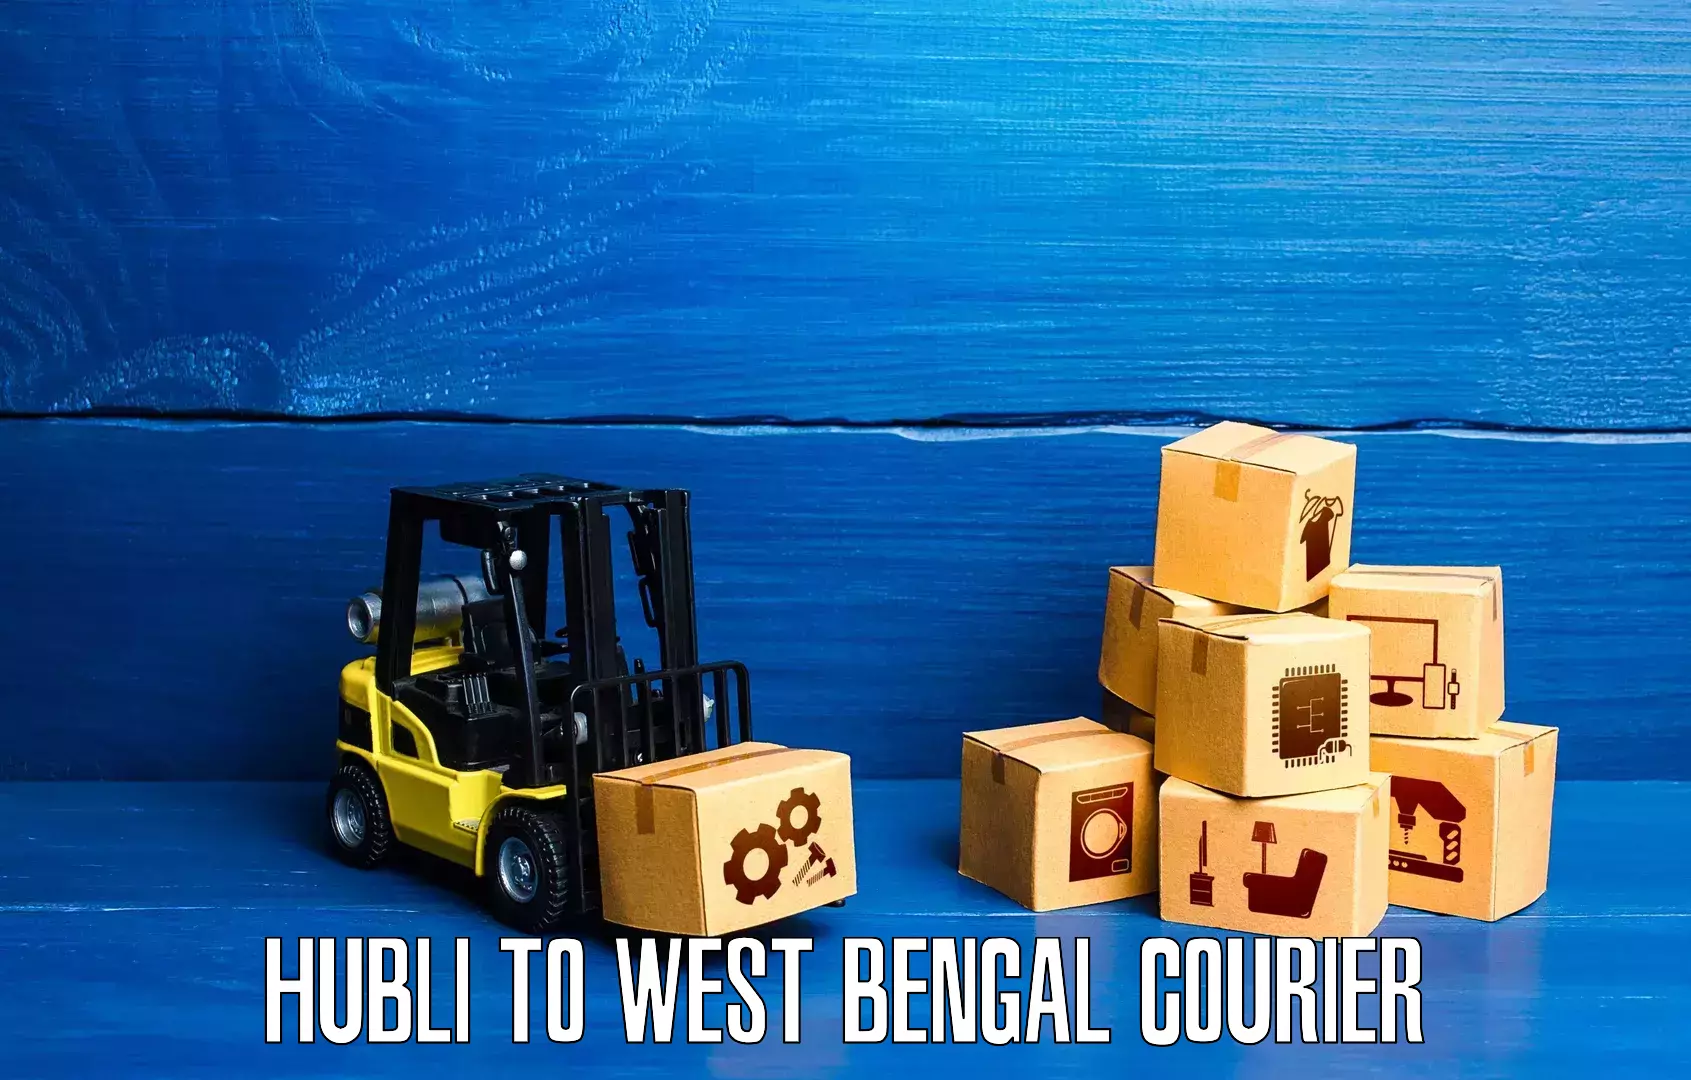 Global courier networks Hubli to West Bengal